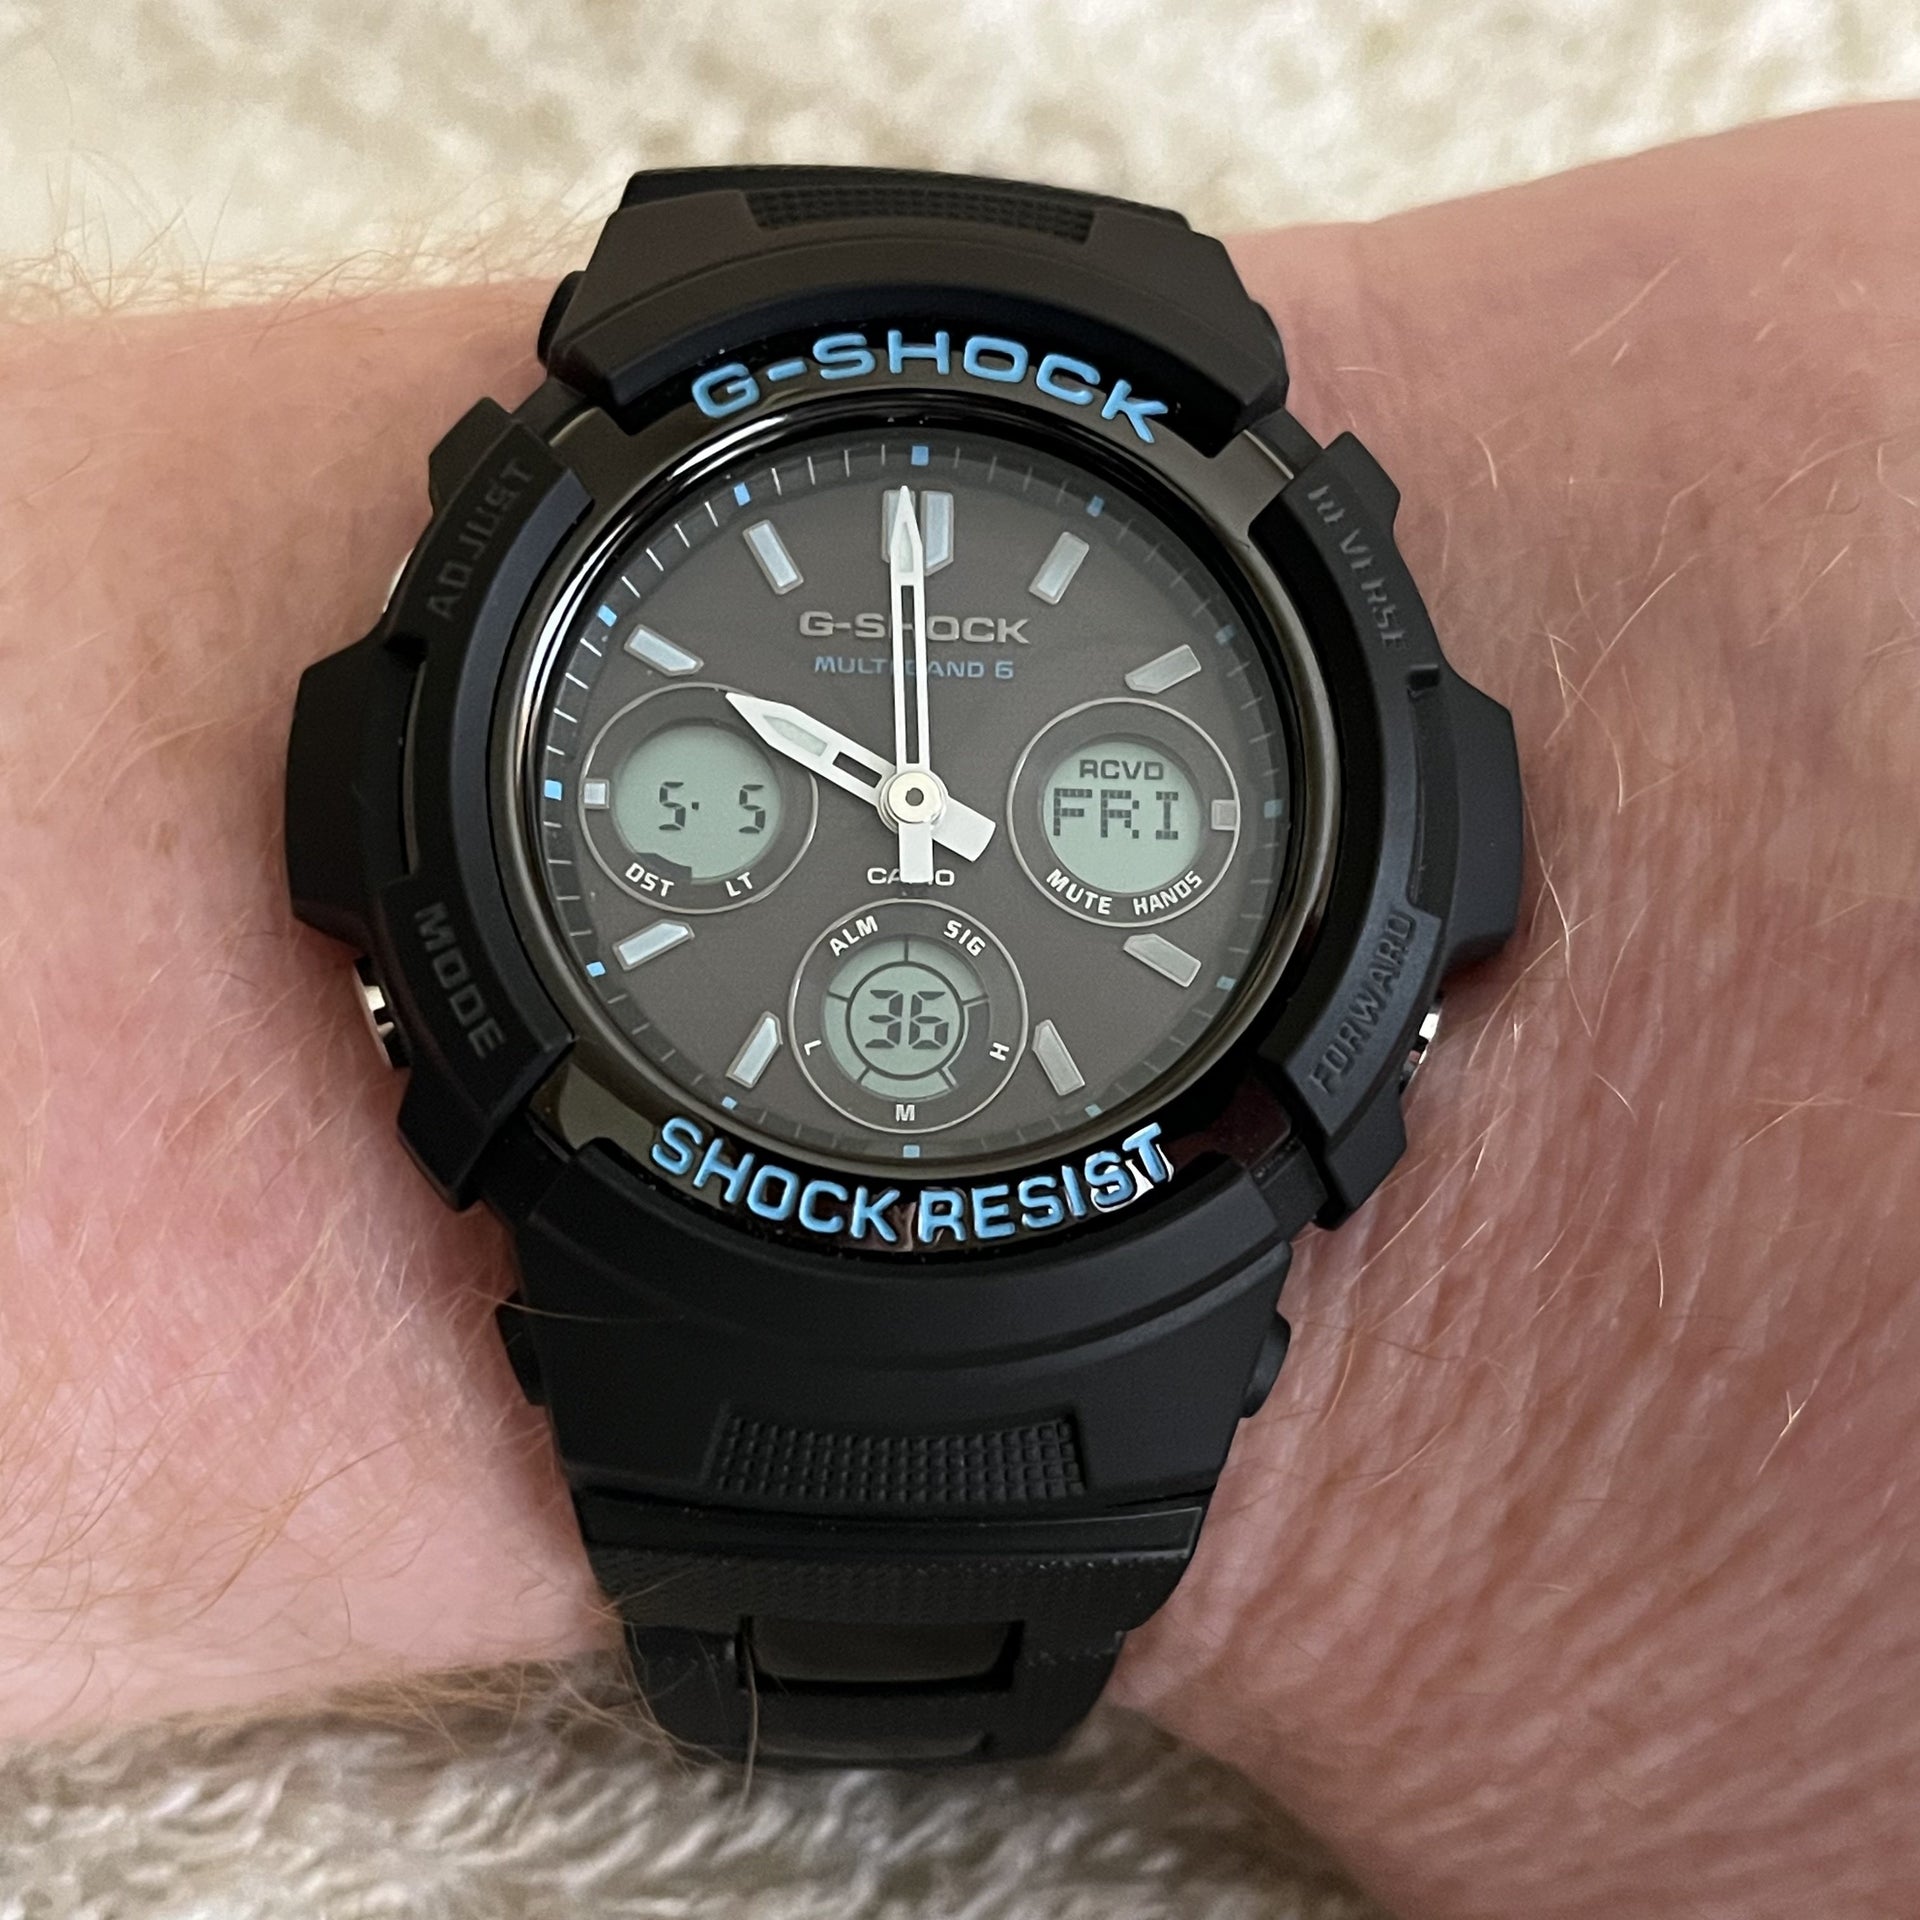 AWG-M100, one of the best G-Shocks outhere. Why do enthusiasts